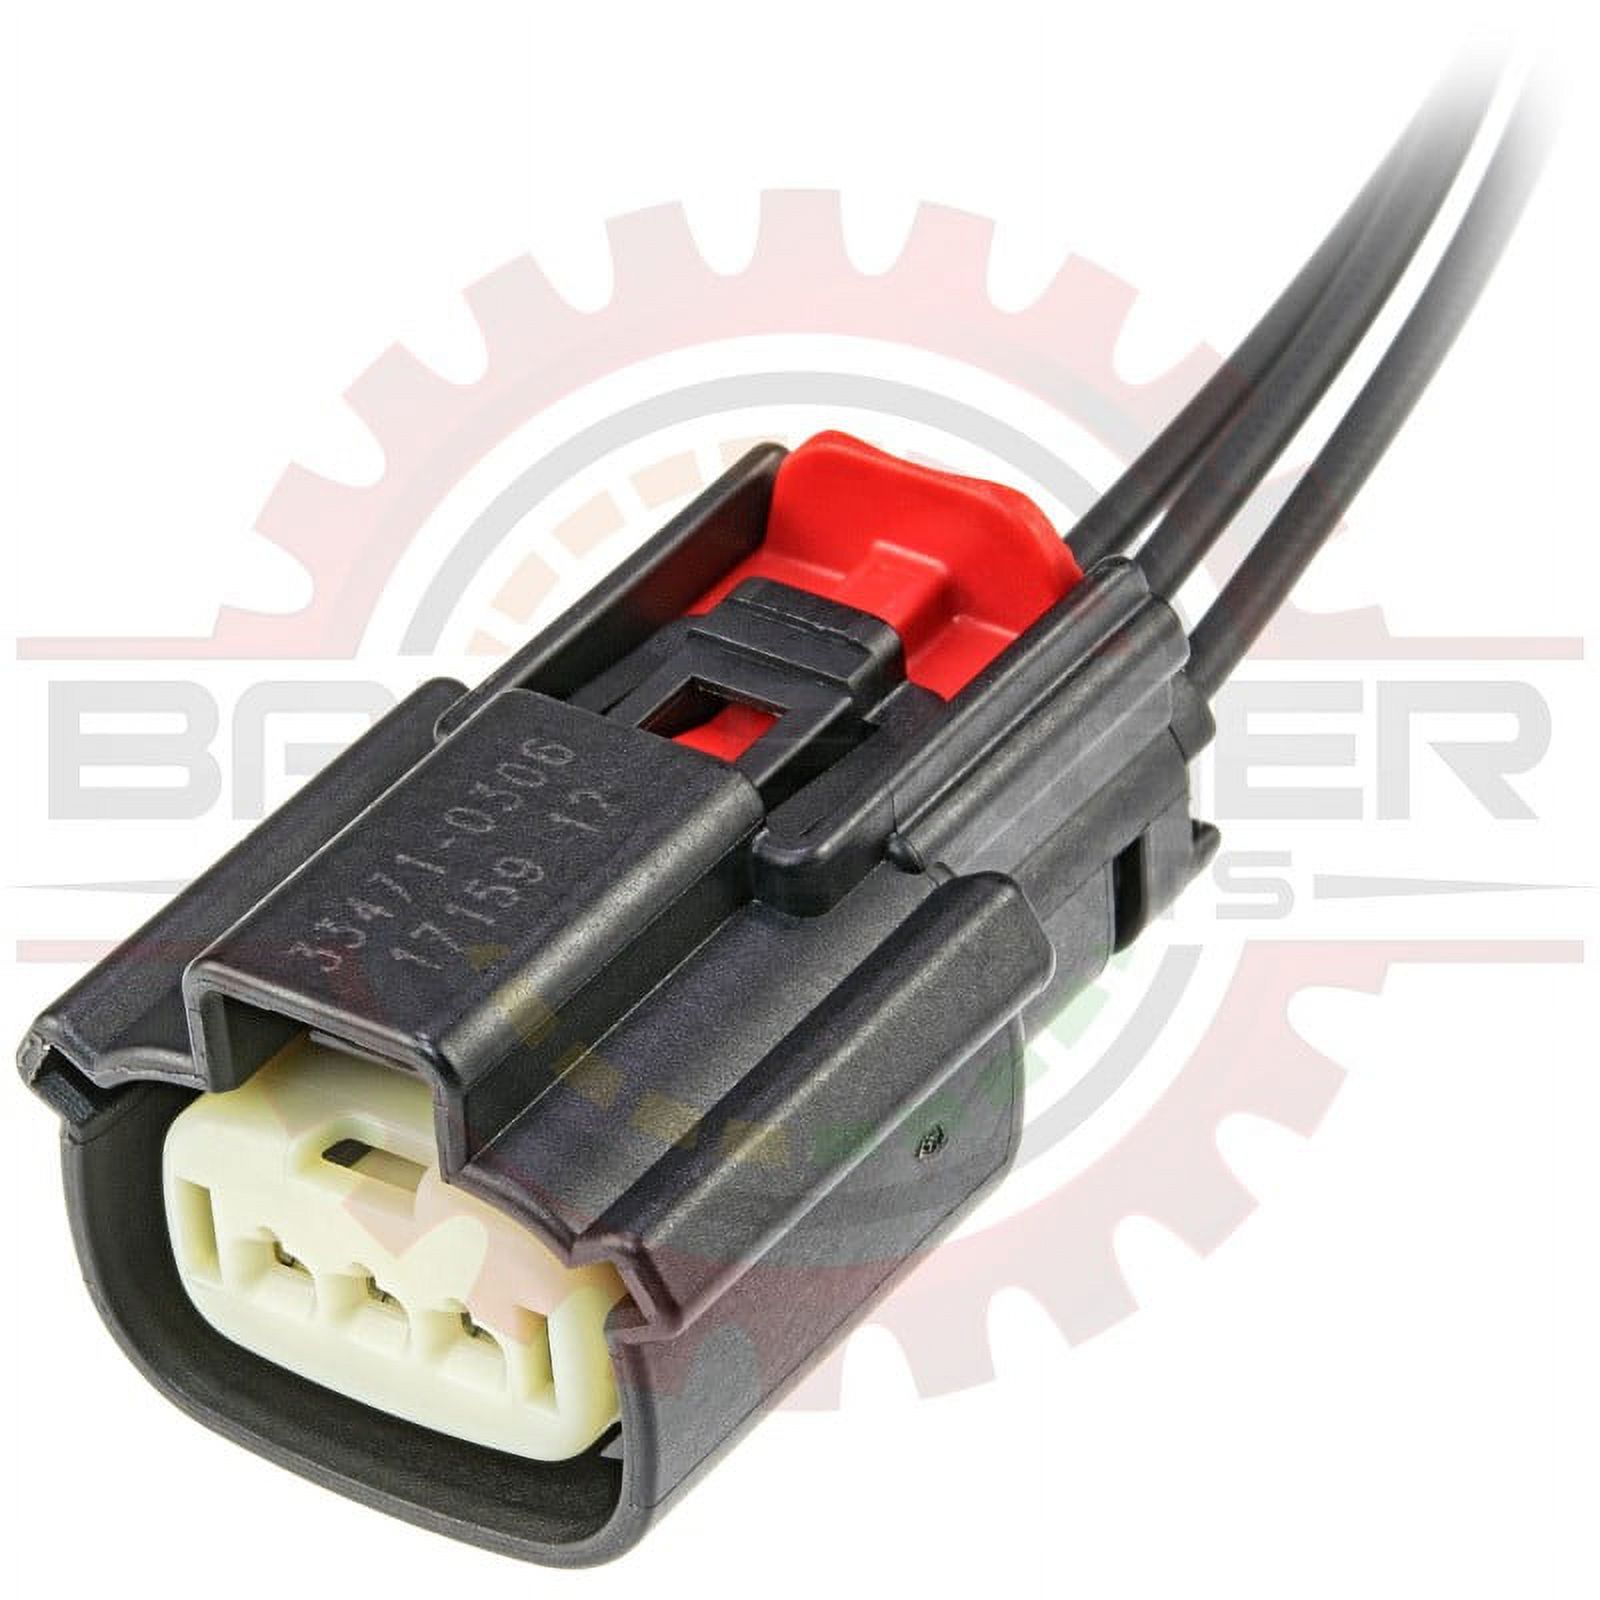 Ballenger Motorsports - 3 Way Ignition Coil & Sensor Connector Pigtail Compatible with Ford / Mazda - image 1 of 3